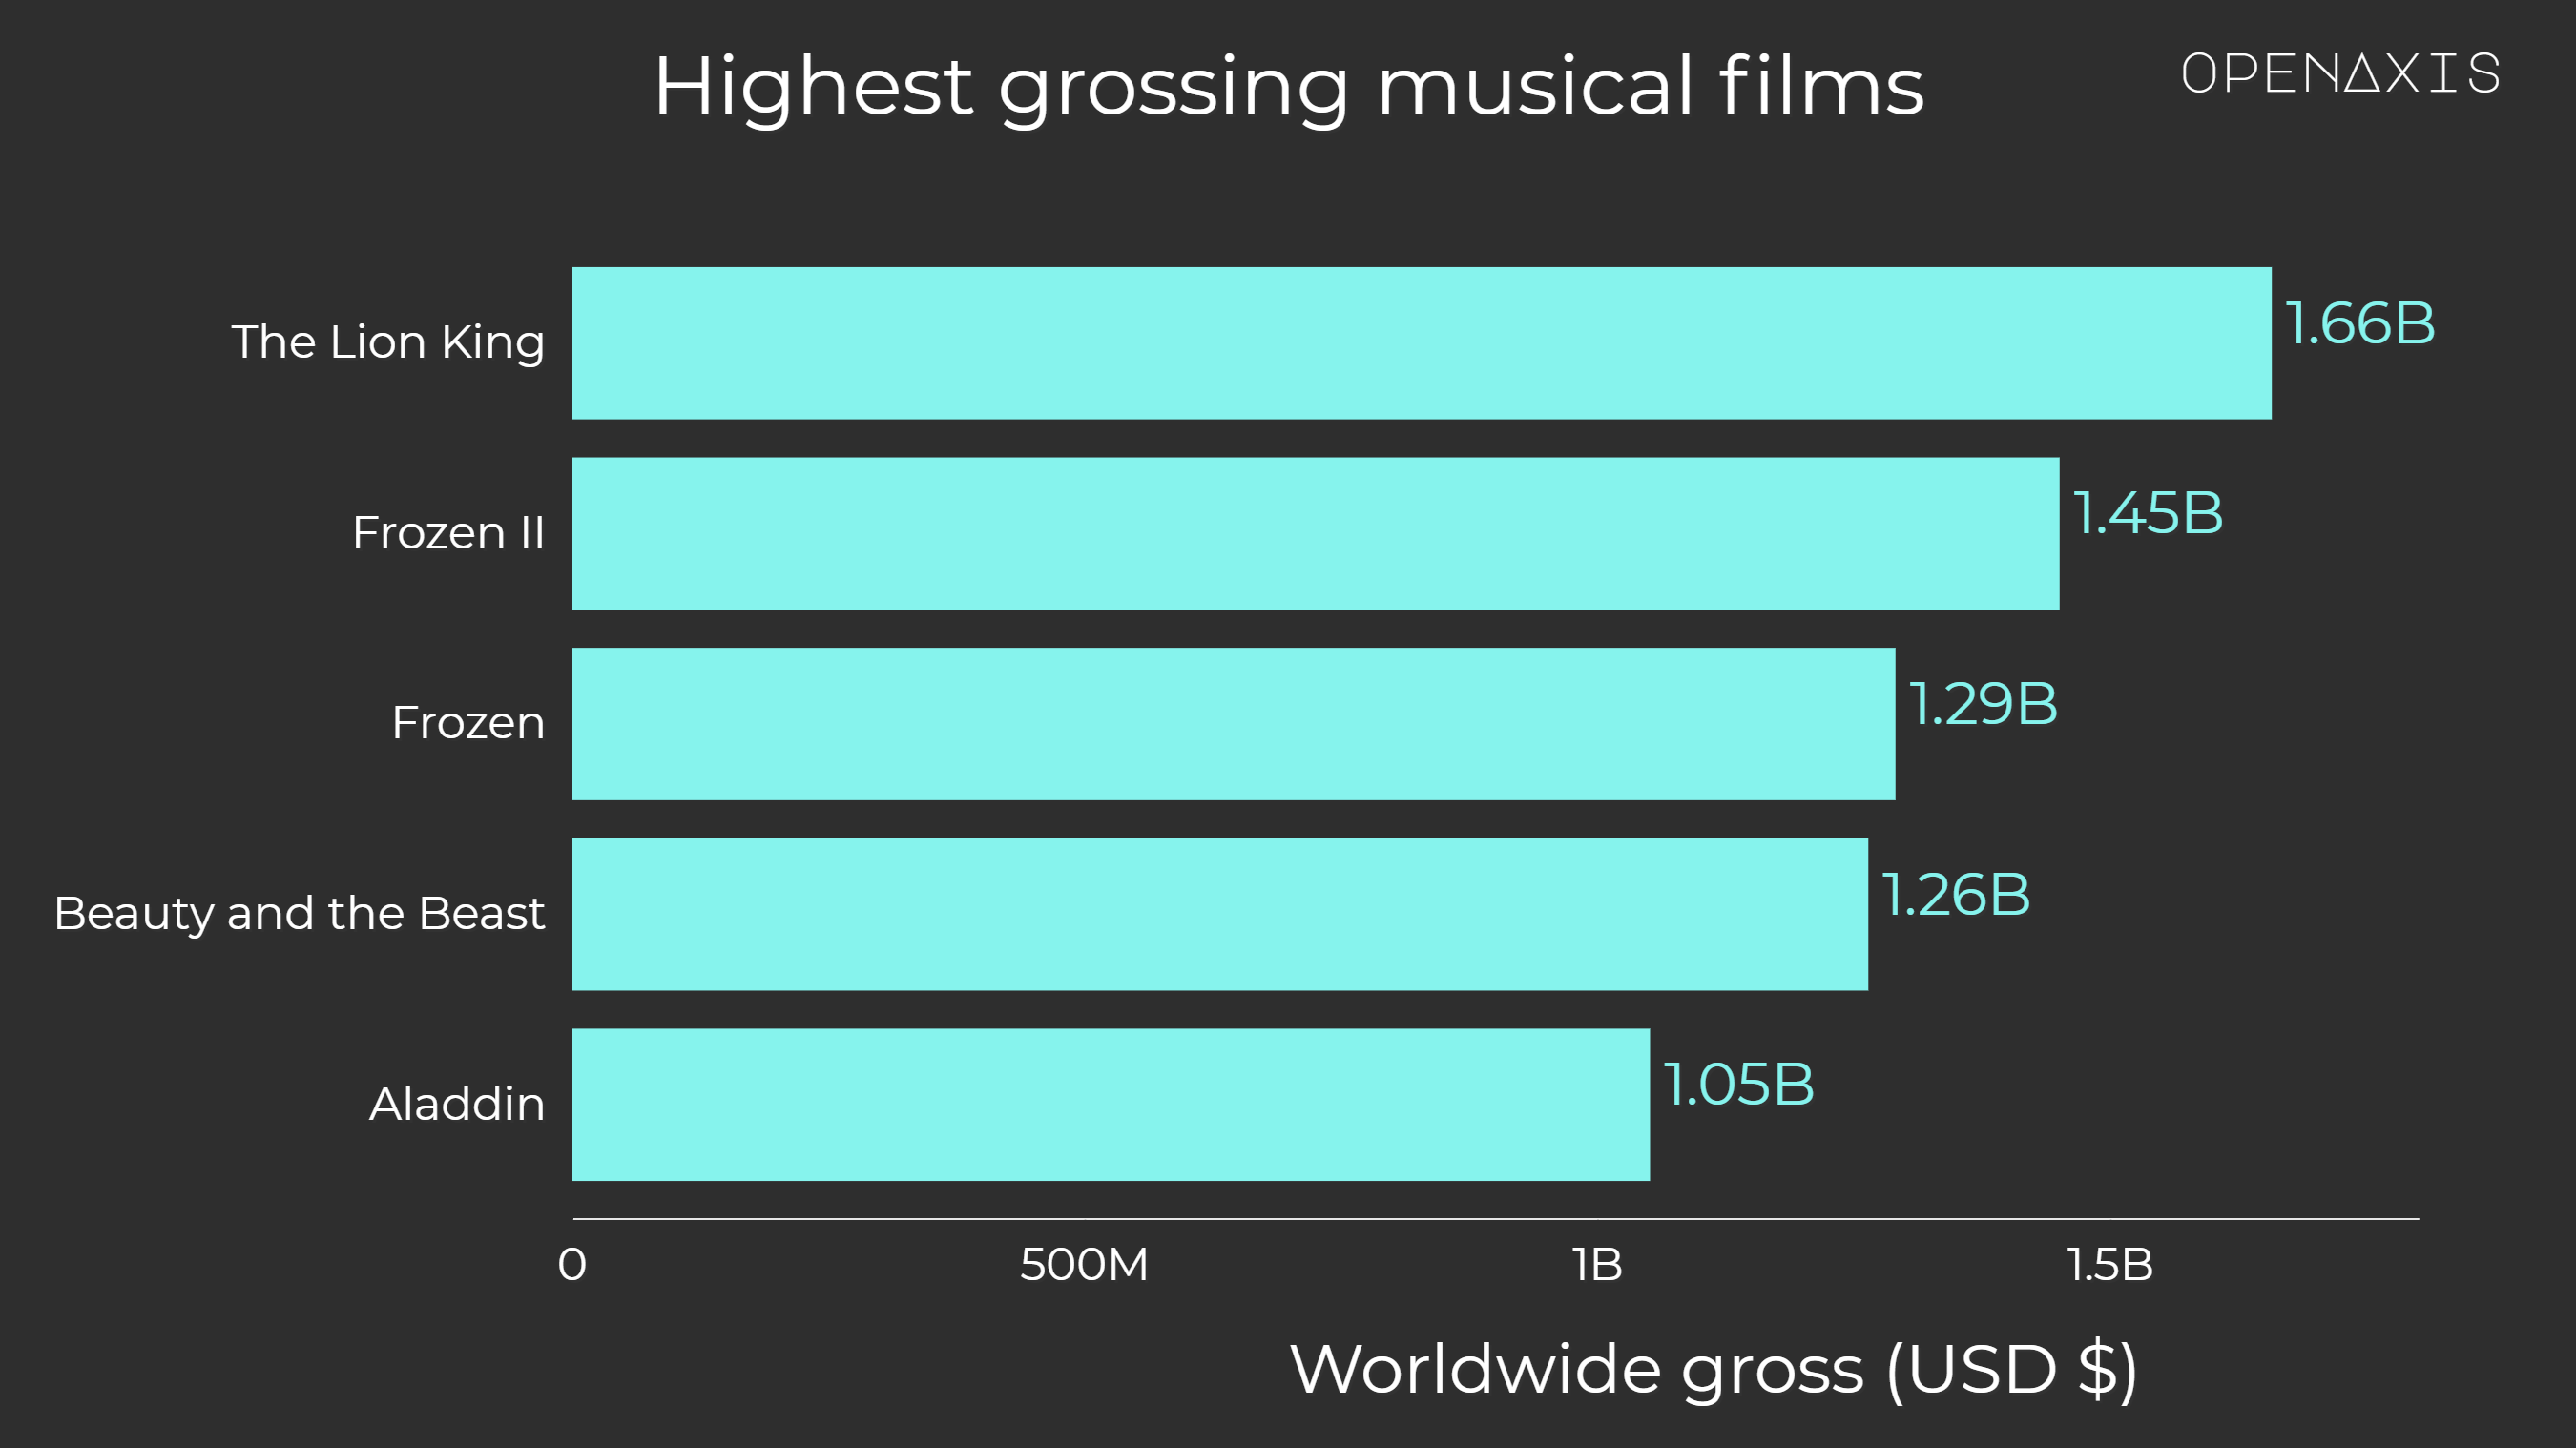 <p>Who said the musical is dead? The last few years have produced box office hits out of film adaptations of Broadway smashes, original movie musicals and a few, beloved, all-time classics.</p><p><br /></p><p>Here are the highest grossing movie musicals of all time based on their worldwide box office gross.</p><p><br /></p><p><span data-index="0" data-denotation-char data-id="0" data-value="&lt;a href=&quot;/search?q=%23entertainment&quot; target=_self&gt;#entertainment" data-link="/search?q=%23entertainment">﻿<span contenteditable="false"><span></span><a href="/search?q=%23entertainment" target="_self">#entertainment</a></span>﻿</span> <span data-index="0" data-denotation-char data-id="0" data-value="&lt;a href=&quot;/search?q=%23musicals&quot; target=_self&gt;#musicals" data-link="/search?q=%23musicals">﻿<span contenteditable="false"><span></span><a href="/search?q=%23musicals" target="_self">#musicals</a></span>﻿</span></p><p><br /></p><p>Source: <a href="/data/3883" target="_blank">Box Office Mojo</a></p><p><br /></p>